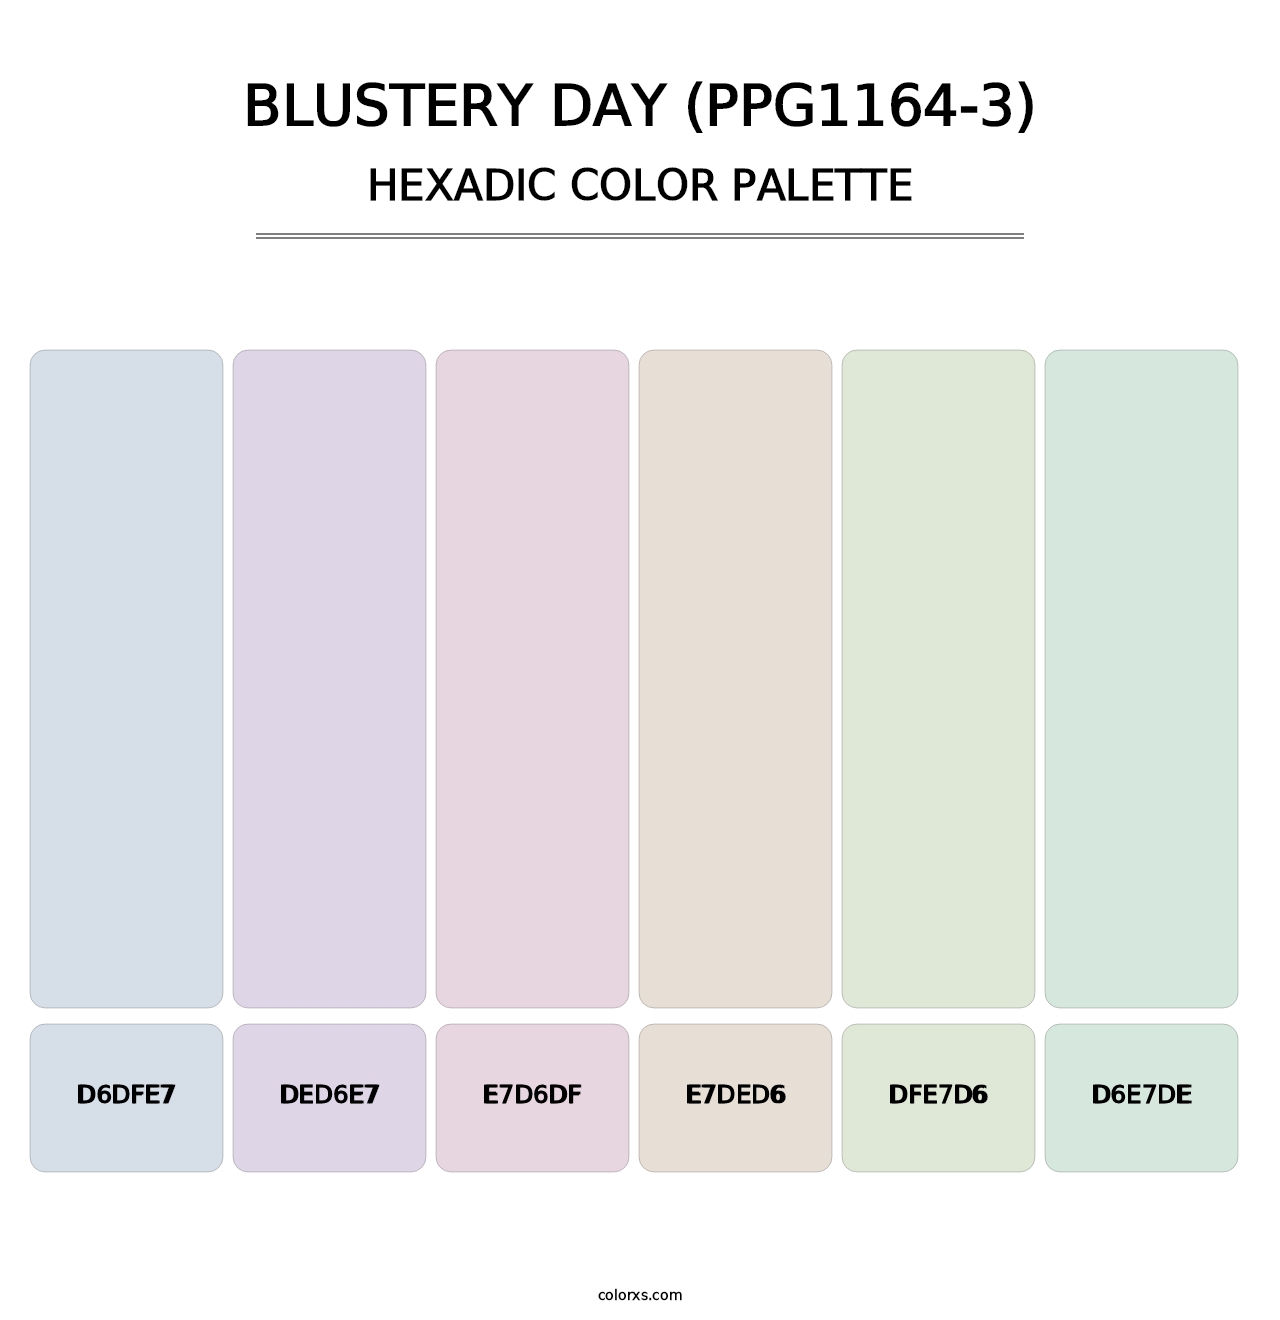 Blustery Day (PPG1164-3) - Hexadic Color Palette